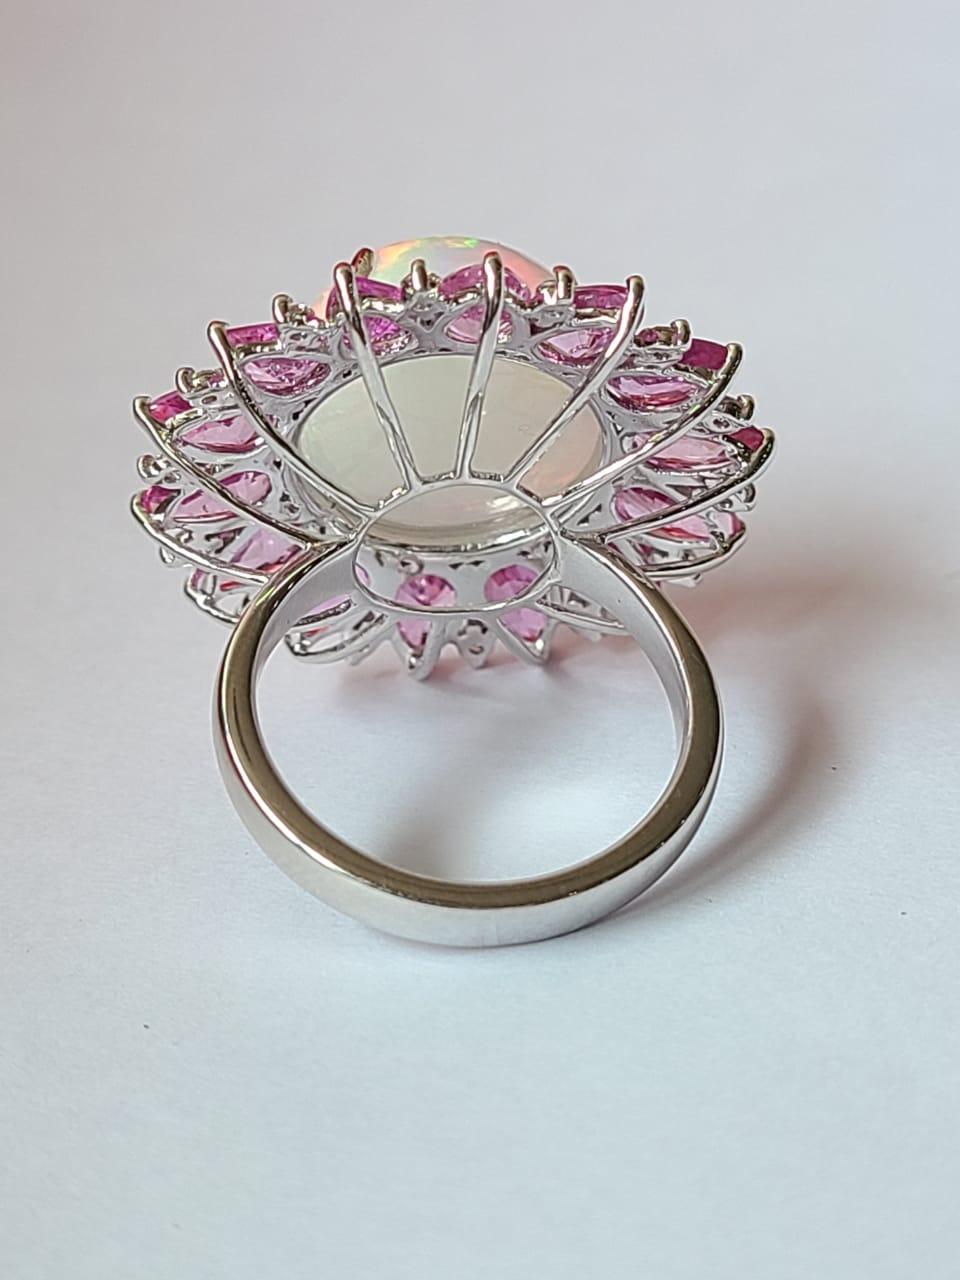 A very gorgeous and one of a kind, Opal & Pink Sapphire Cocktail Ring set in 18K Gold & Diamonds. The weight of the Opal is 9.08 carats. The Opal is of Ethiopian origin and has a gorgeous play of colour. The weight of the Pink Sapphires is 6.46